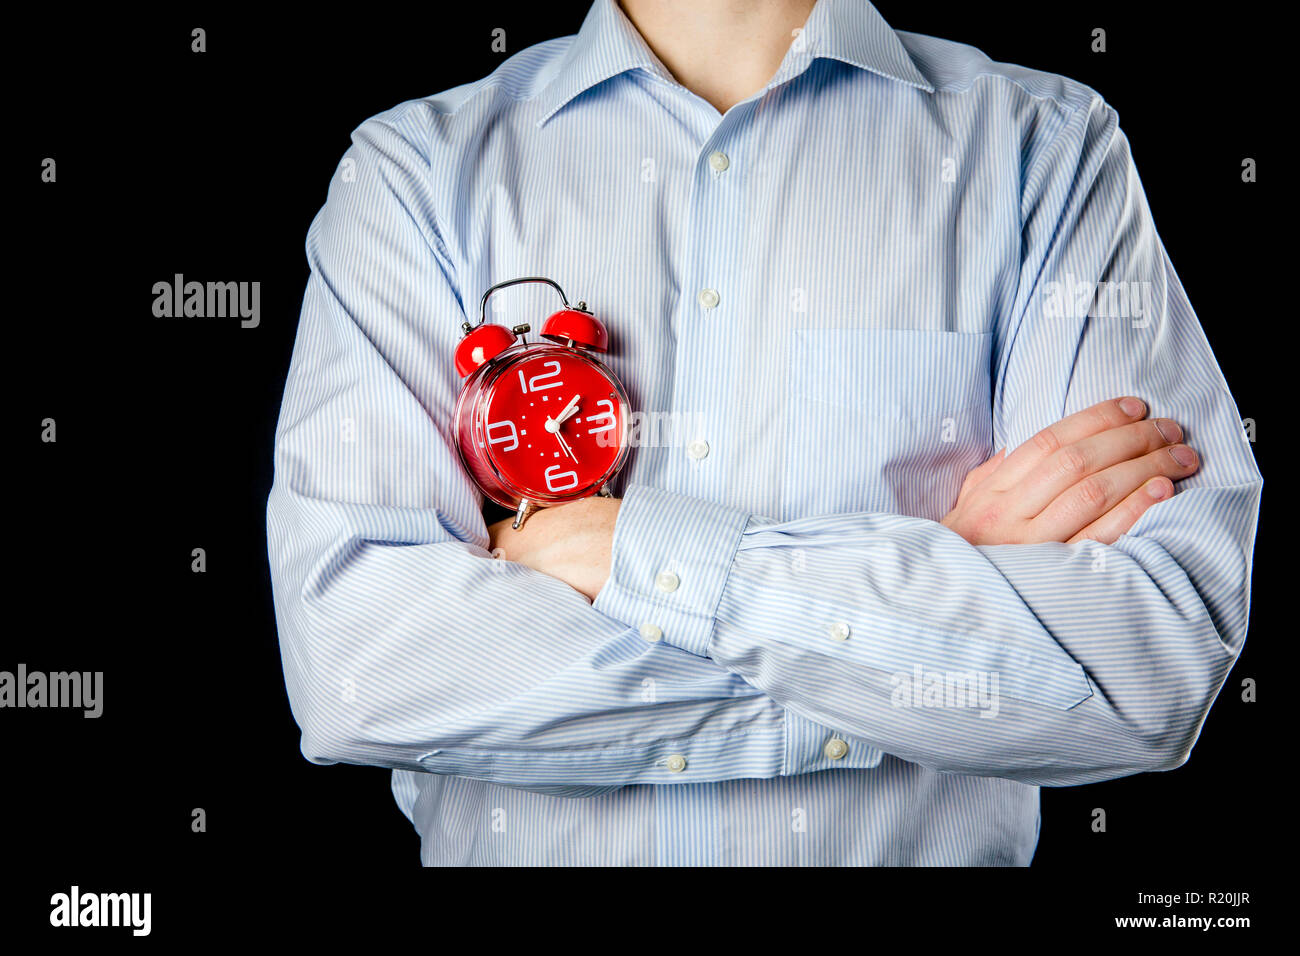 Adult male wearing formal shirt and hands crossed holding big red vintage alarm clock. Time concept. Stock Photo